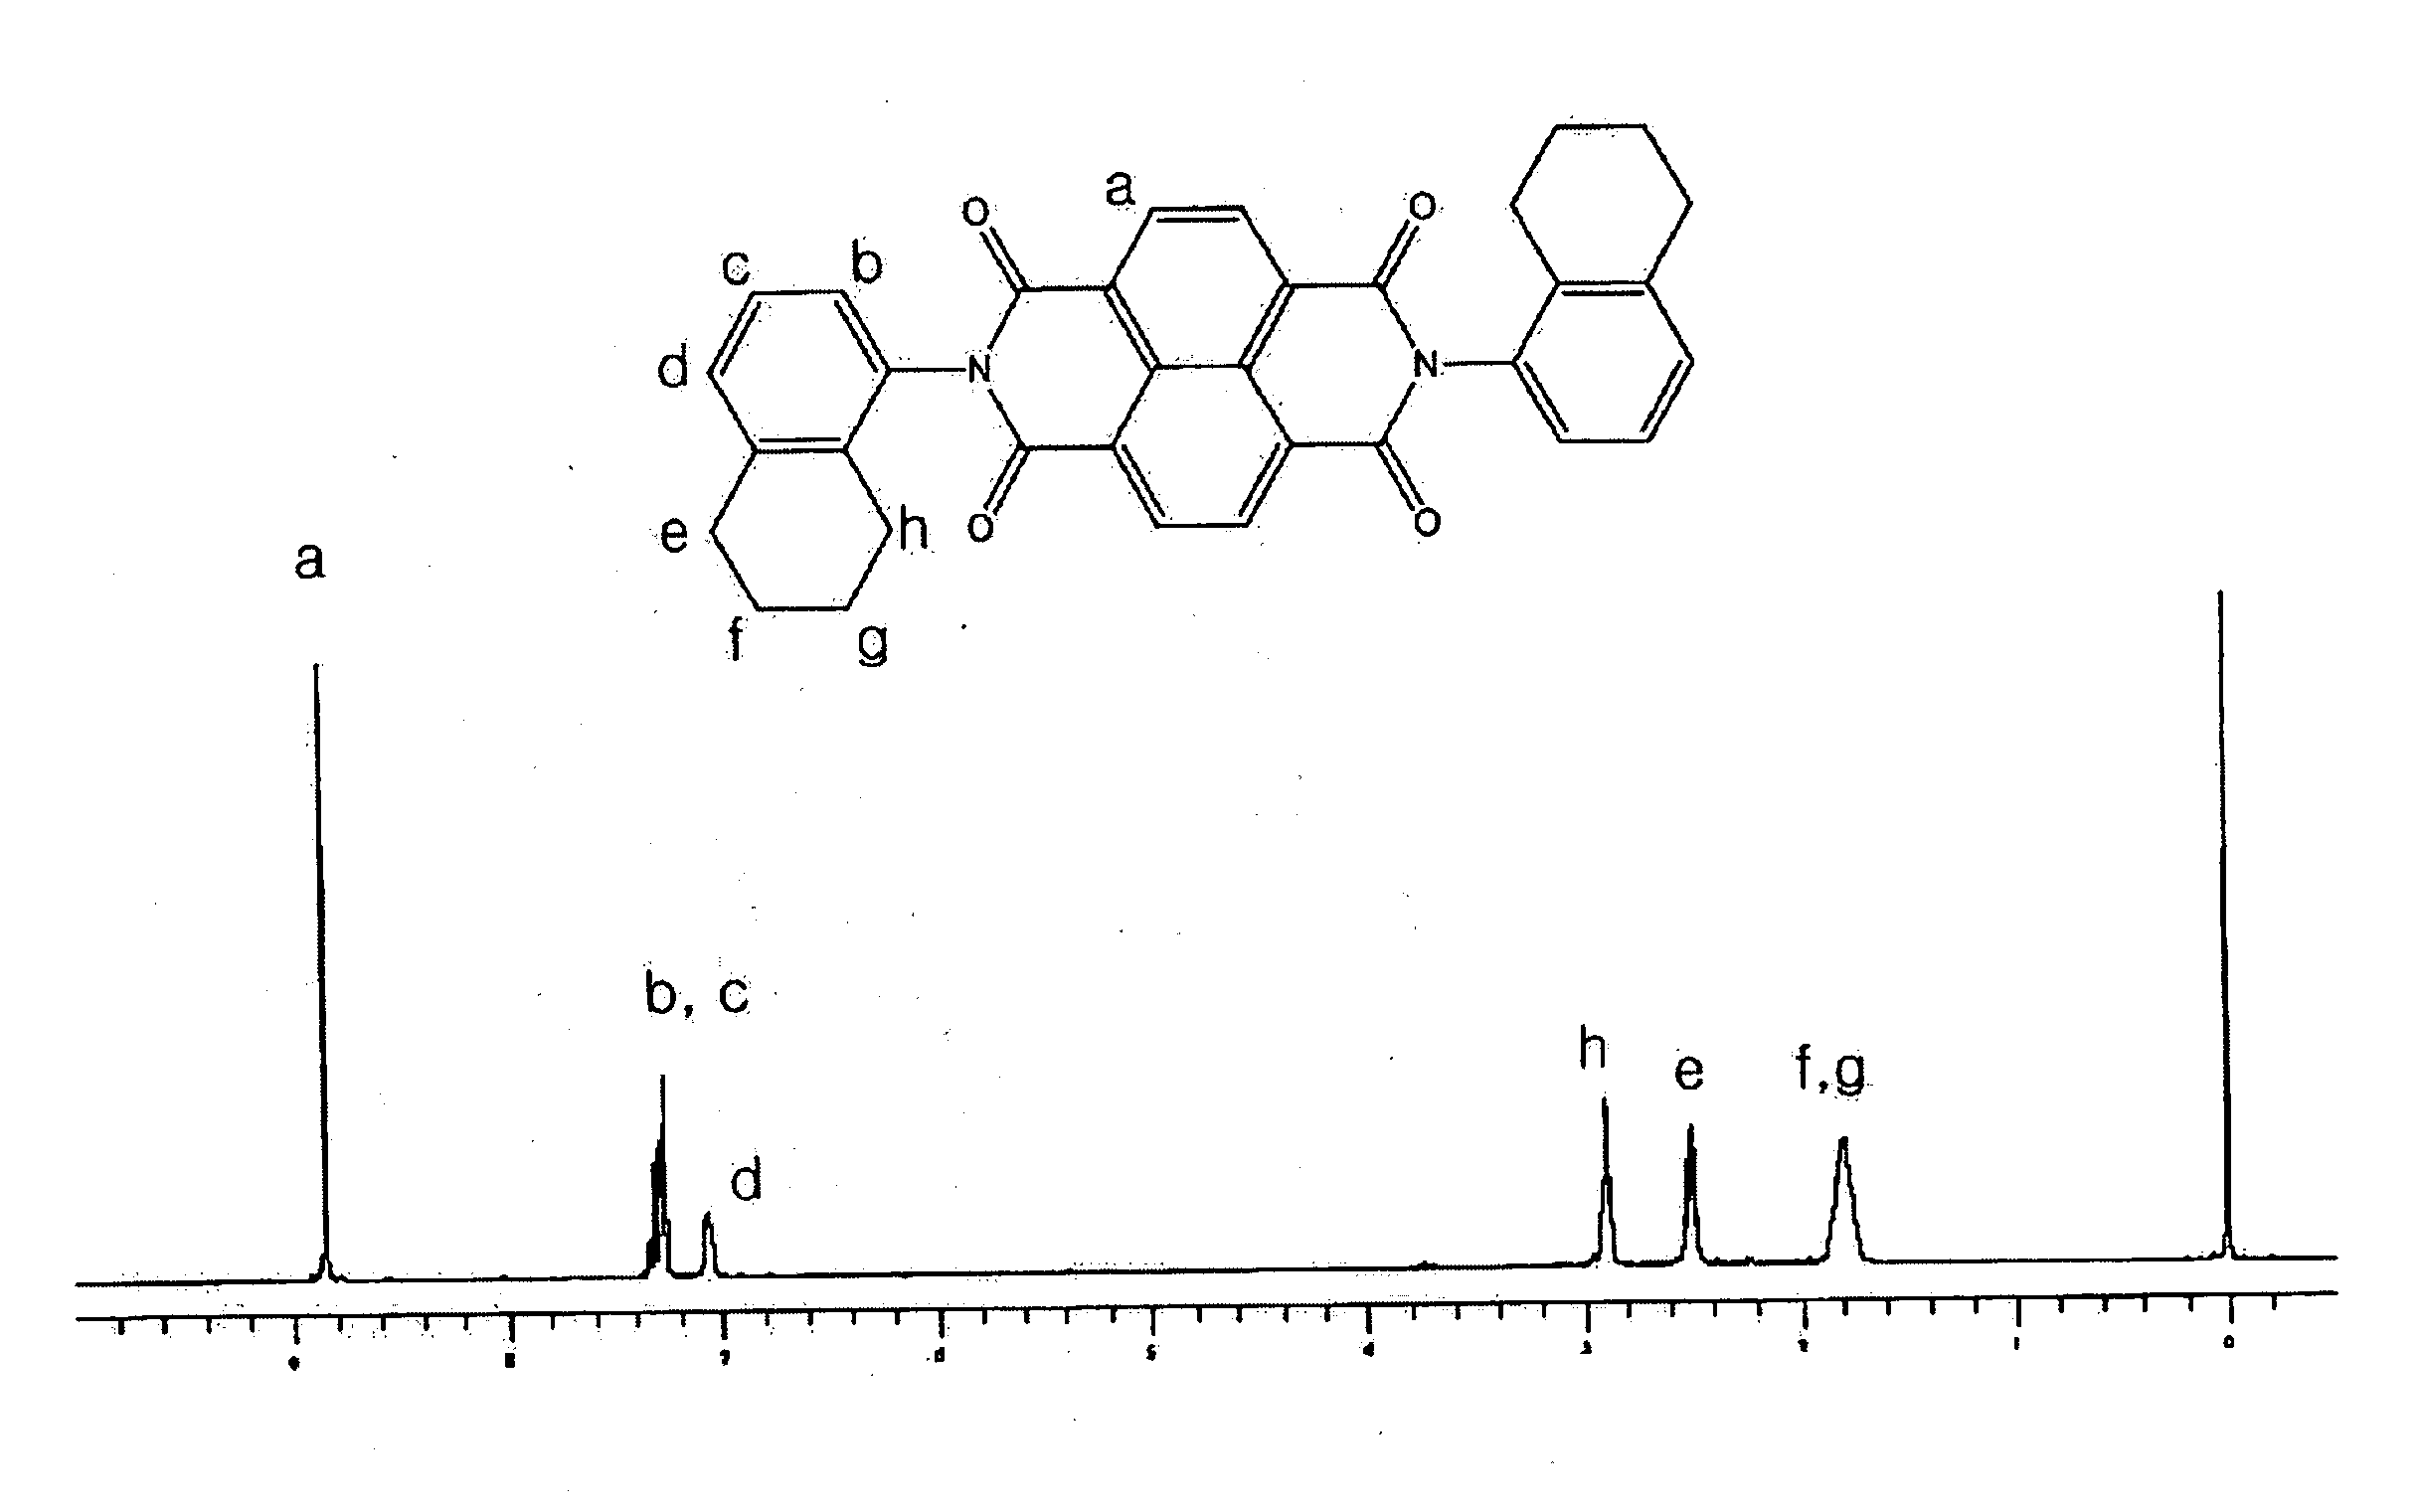 Naphthalenetetracarboxylic acid diimide derivatives and electrophotographic photoconductive material having the same